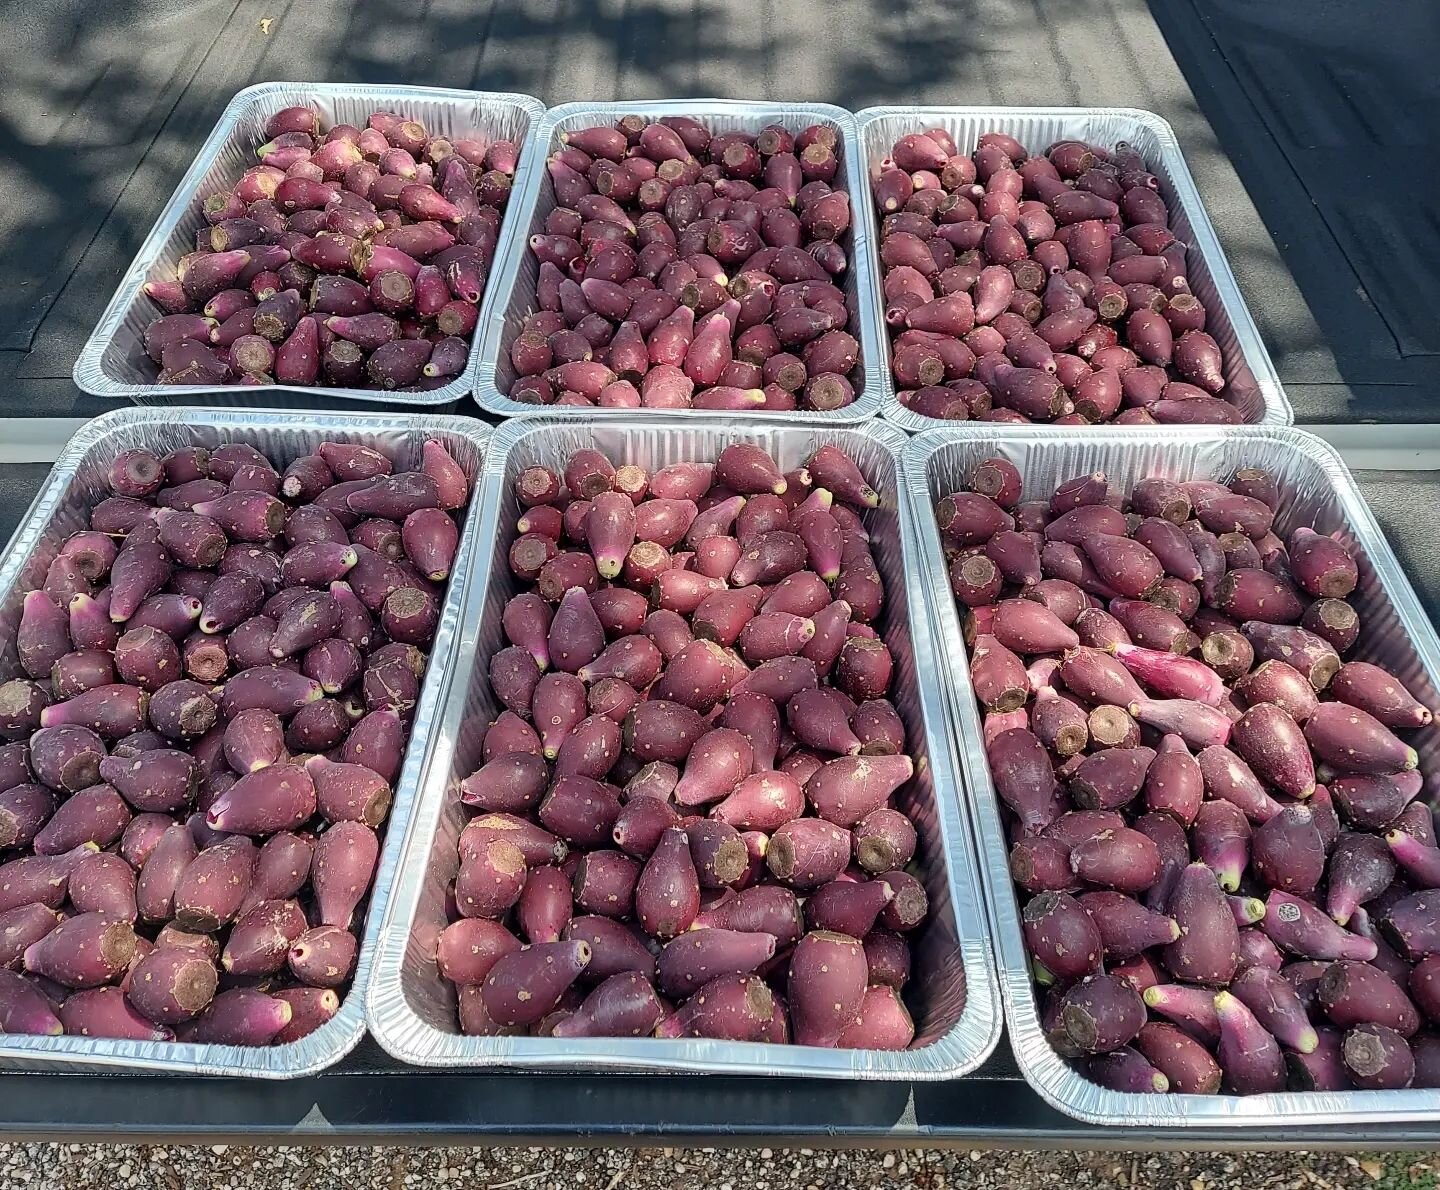 We have several patches of Prickly Pear that we had left untouched throughout the first part of the season. It's now time to harvest from them, and these tunas are beauties. #pricklypearcactusfruit #mccartylandfarms